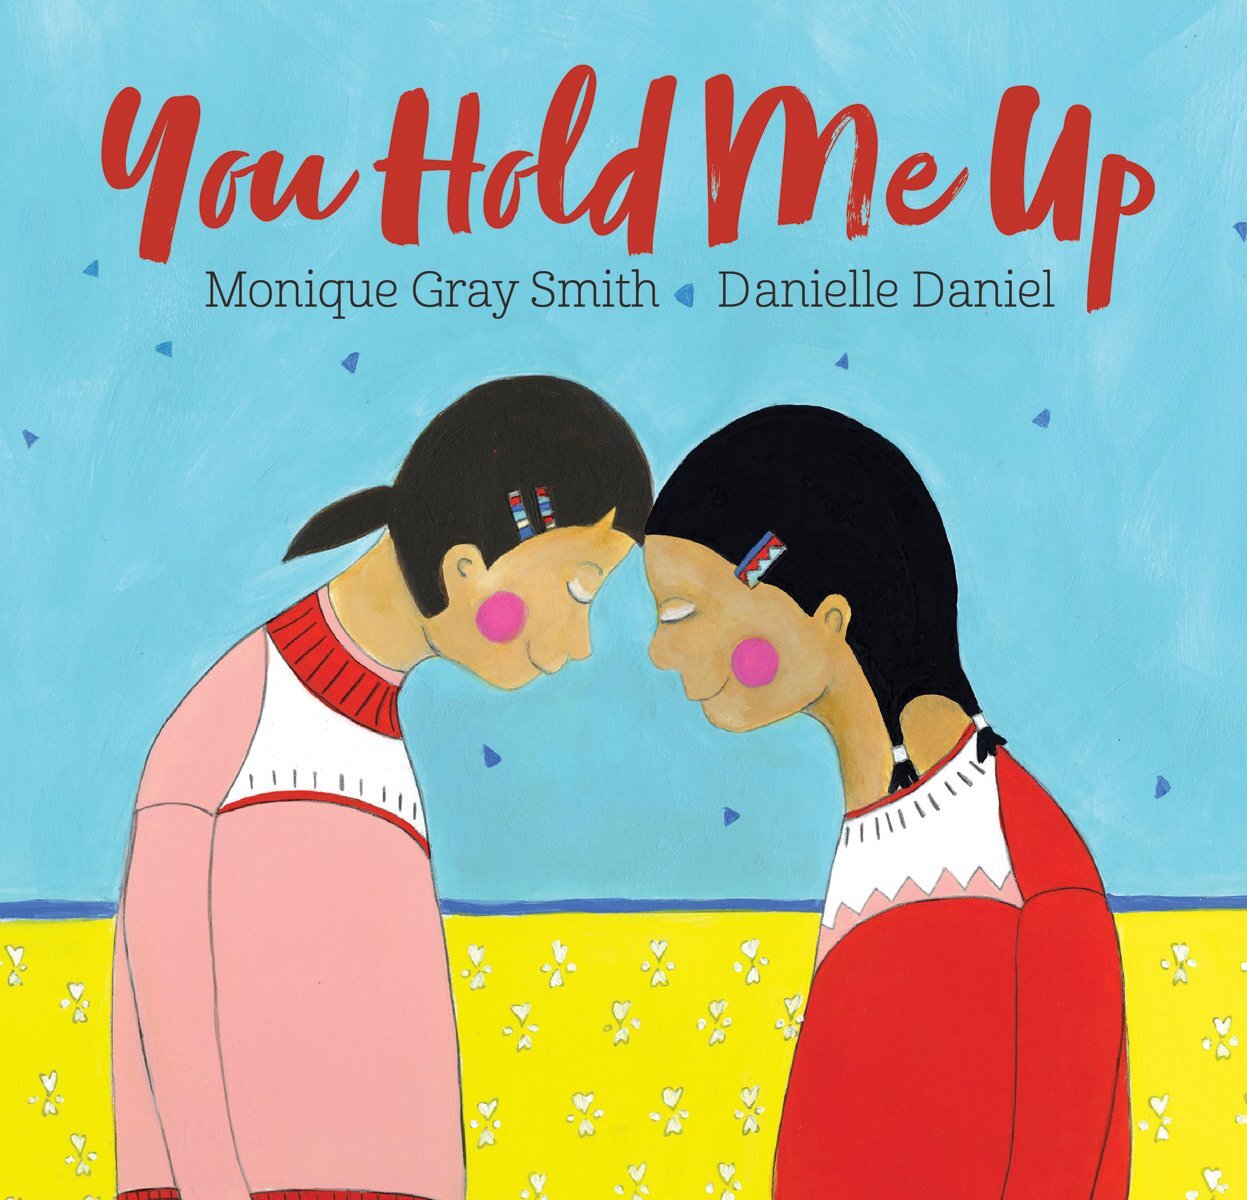 You Hold Me Up by Monique Grey Smith